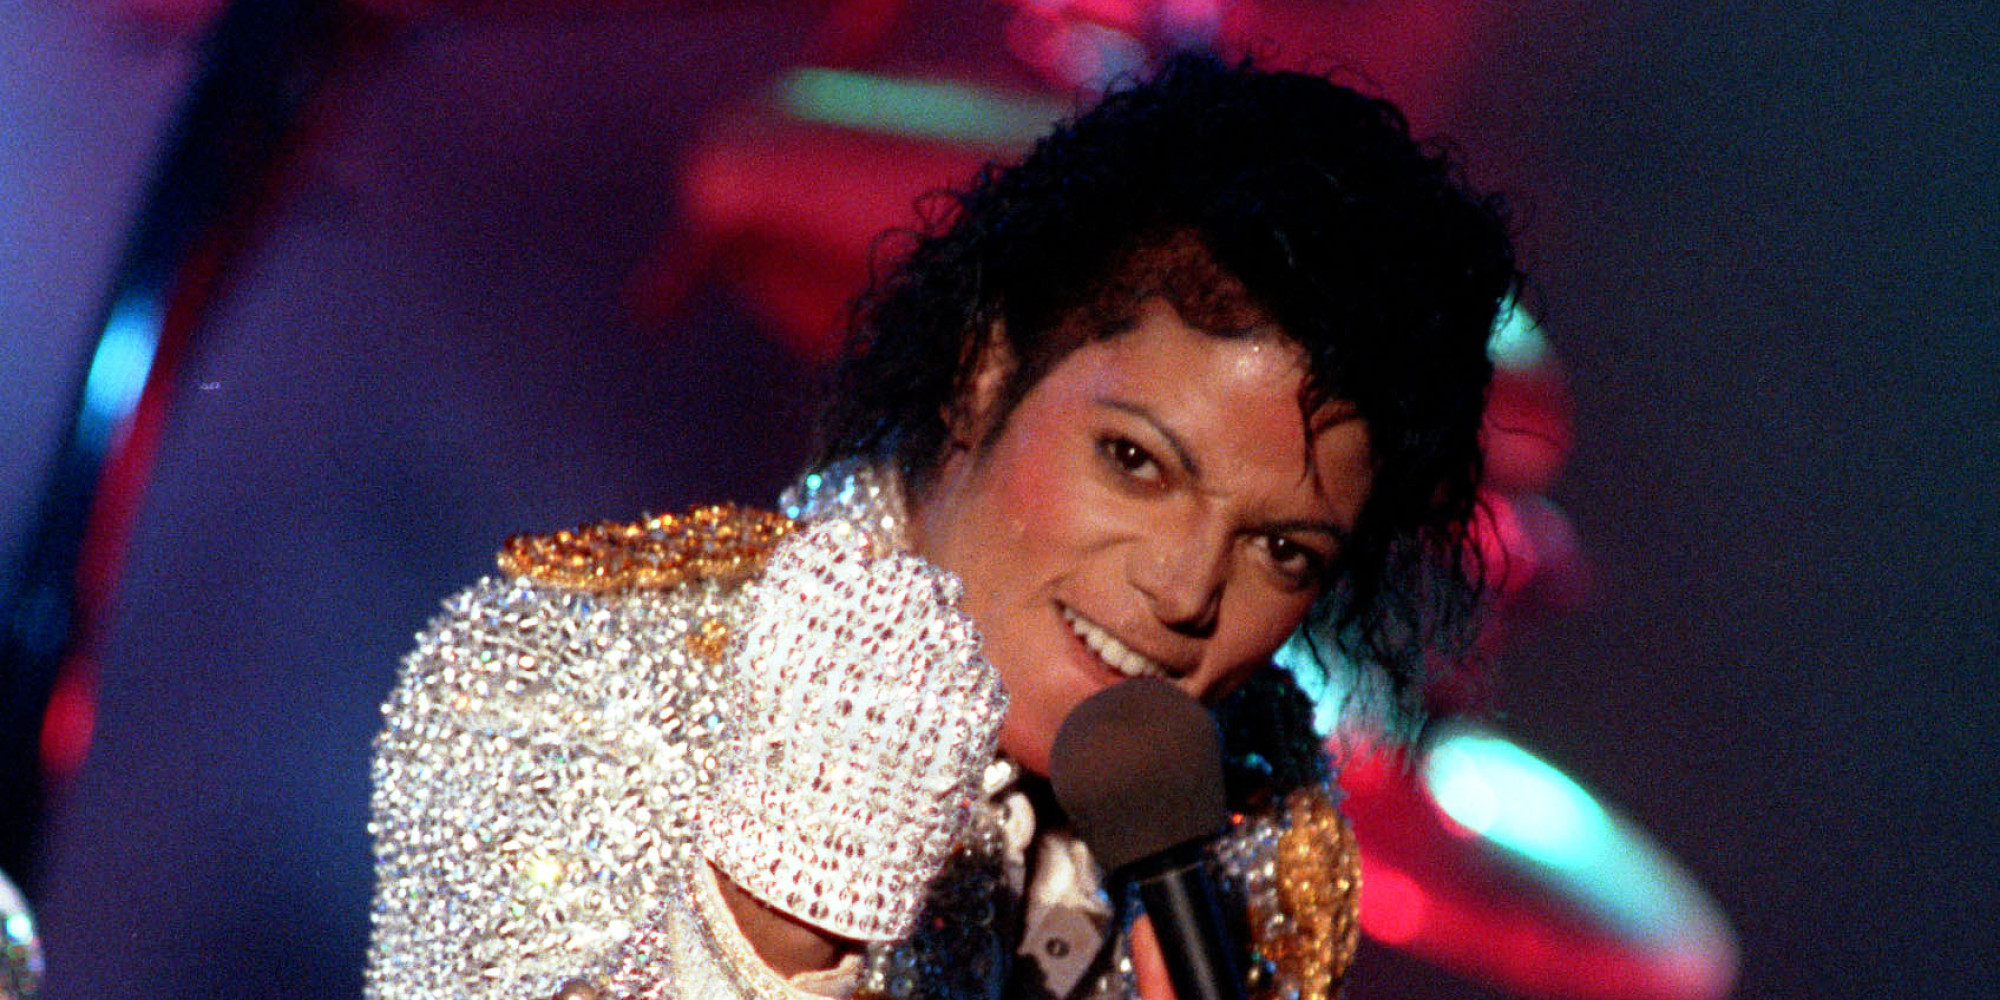 His estate signed a deal with Sony that gave them access to his unreleased recordings for $250 million.